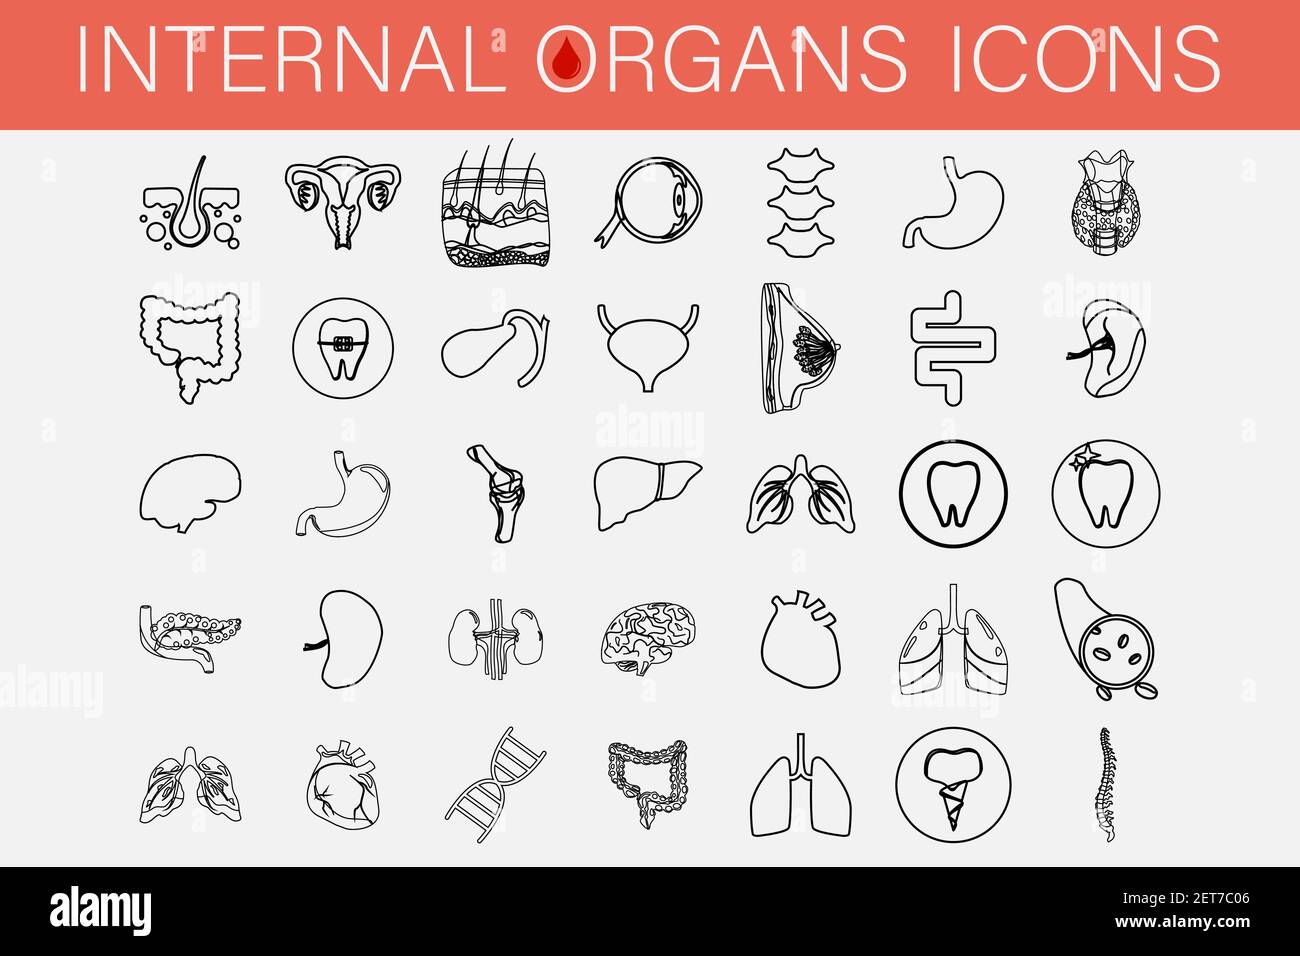 Set of icons of internal organs and parts of man. Stock Vector